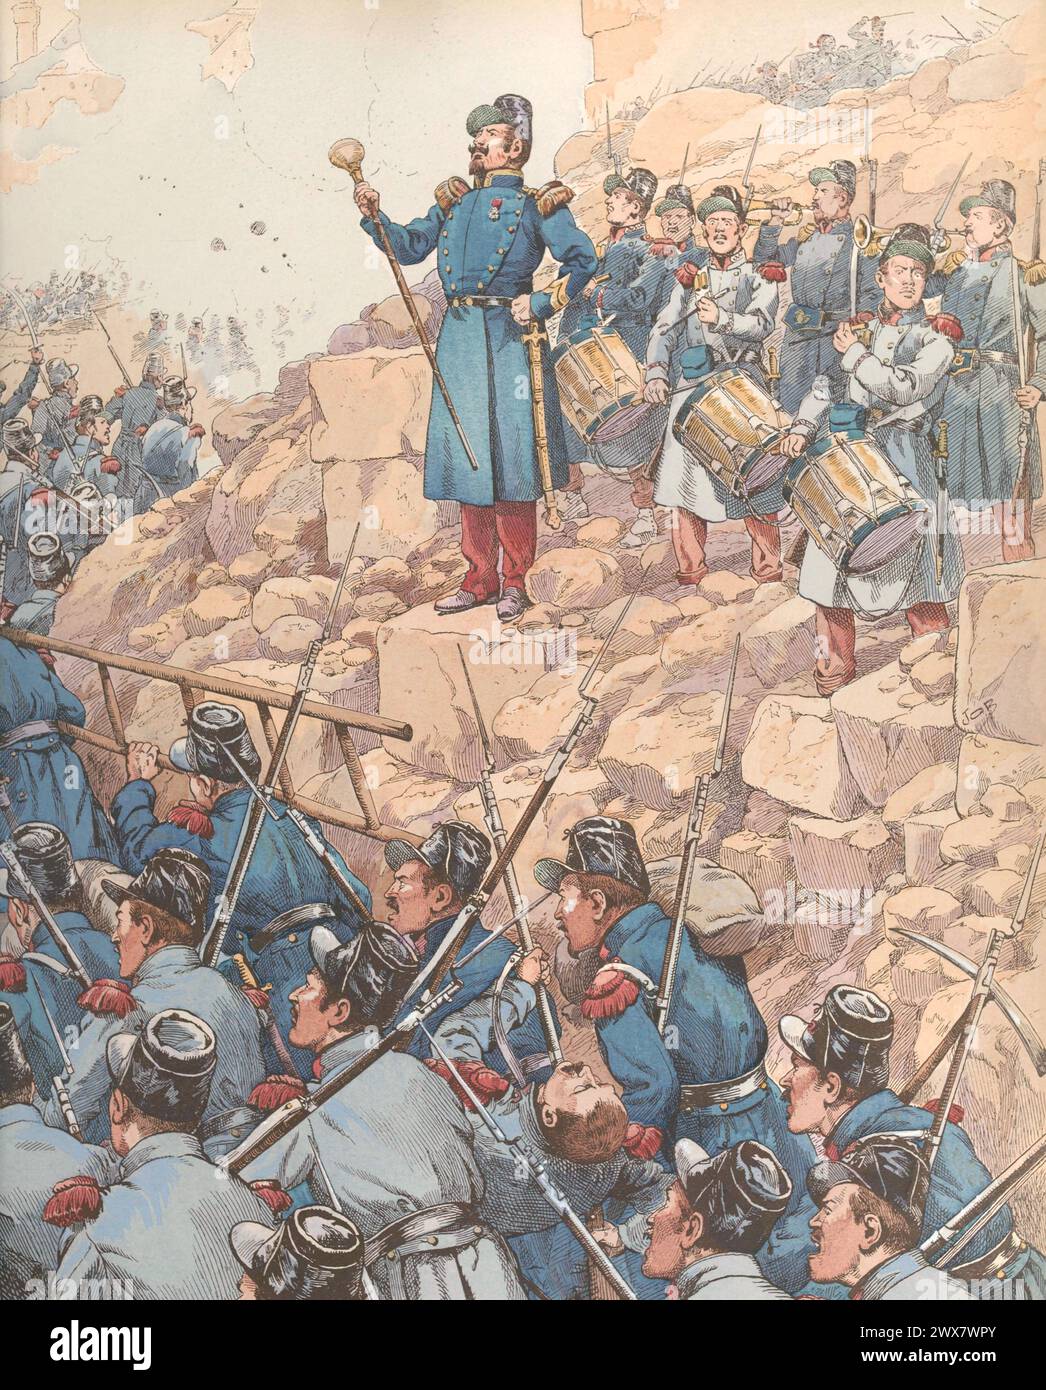 French Drum major during the siege of Constantine in 1837.  Illustration by Job published in the book 'Allons, Enfants de la Patrie !...' by Jean Richepin. Published by A. Mame et fils in 1920. Stock Photo